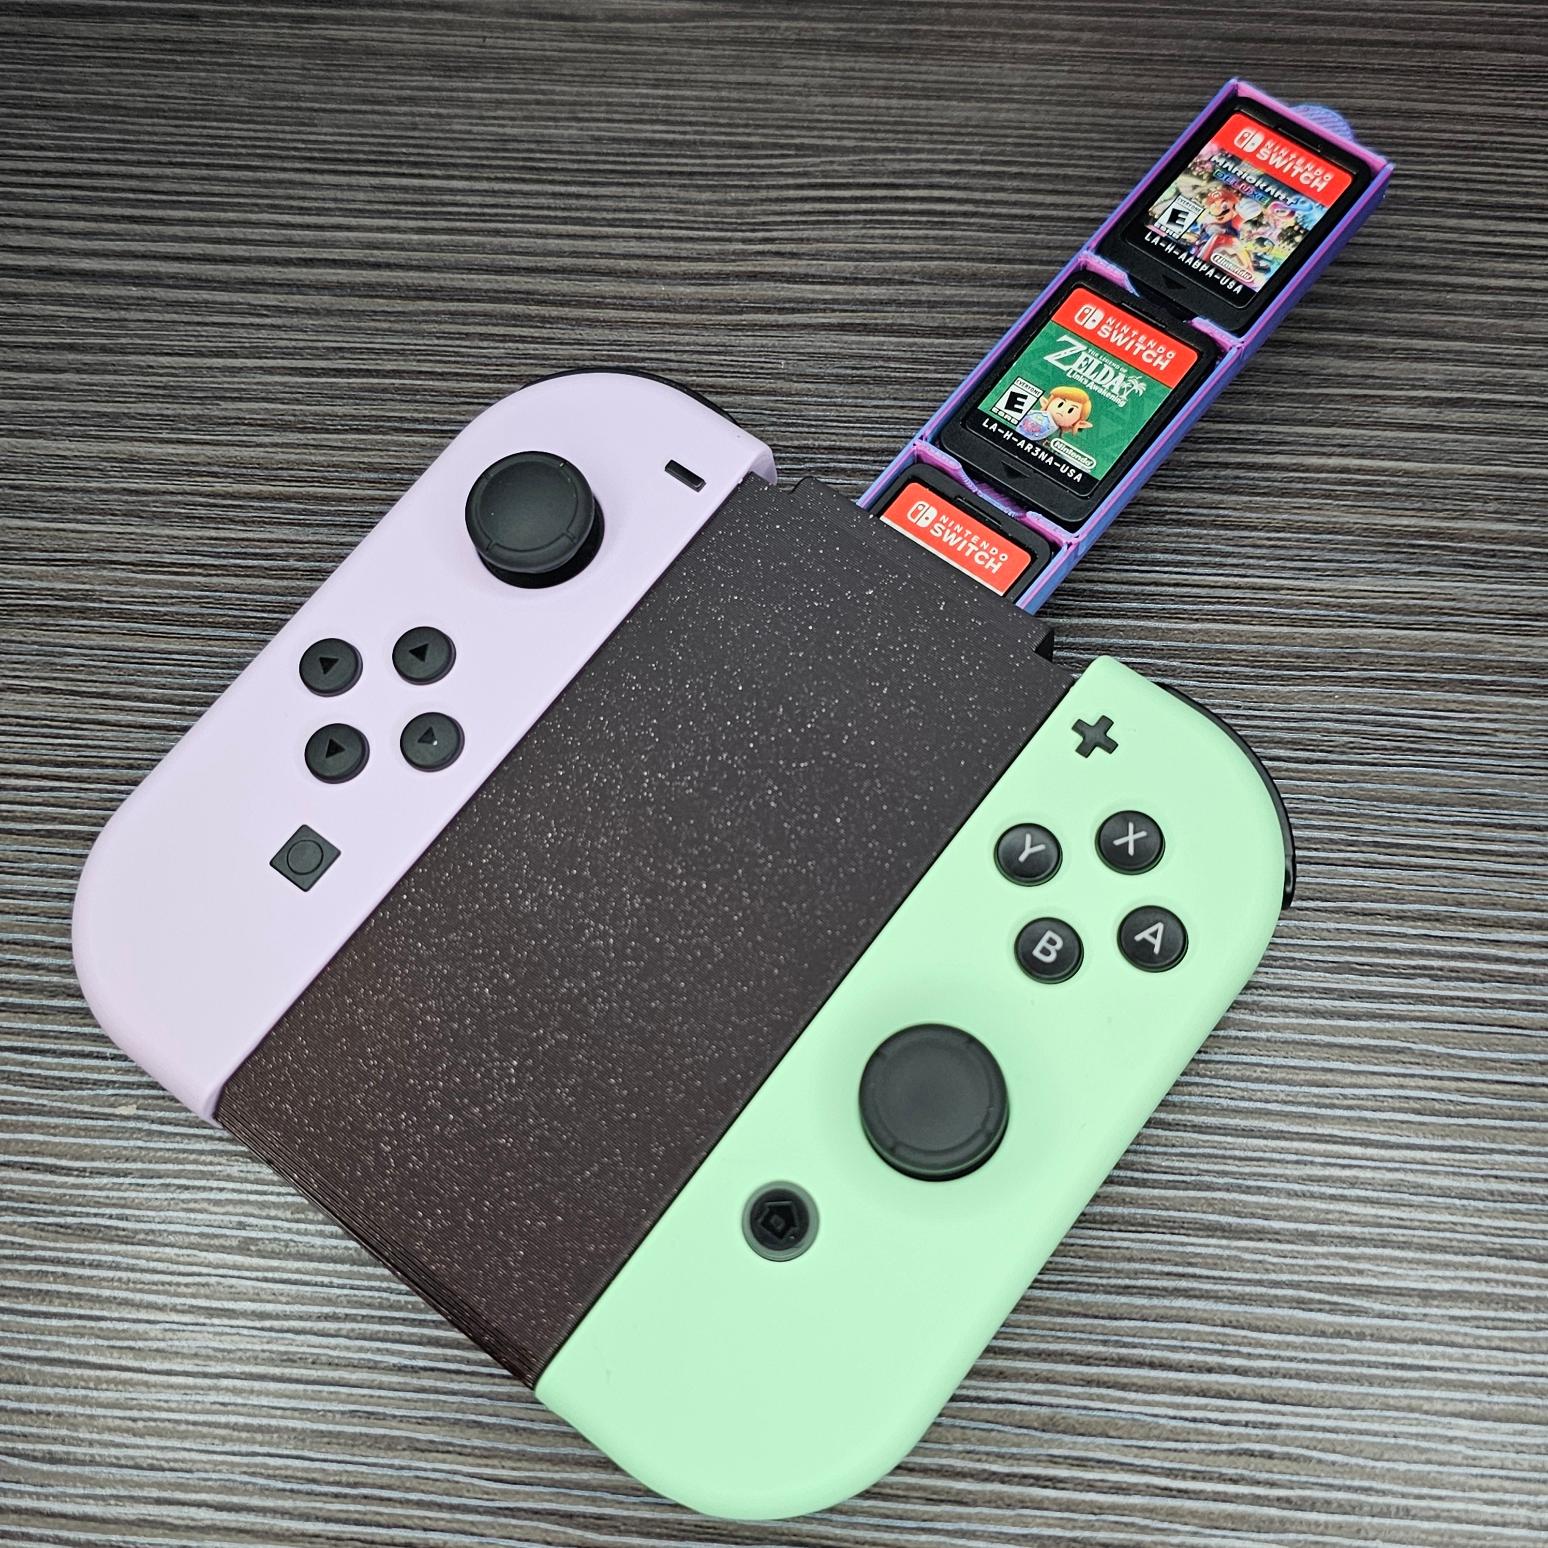 Game Grip for Nintendo Switch and more